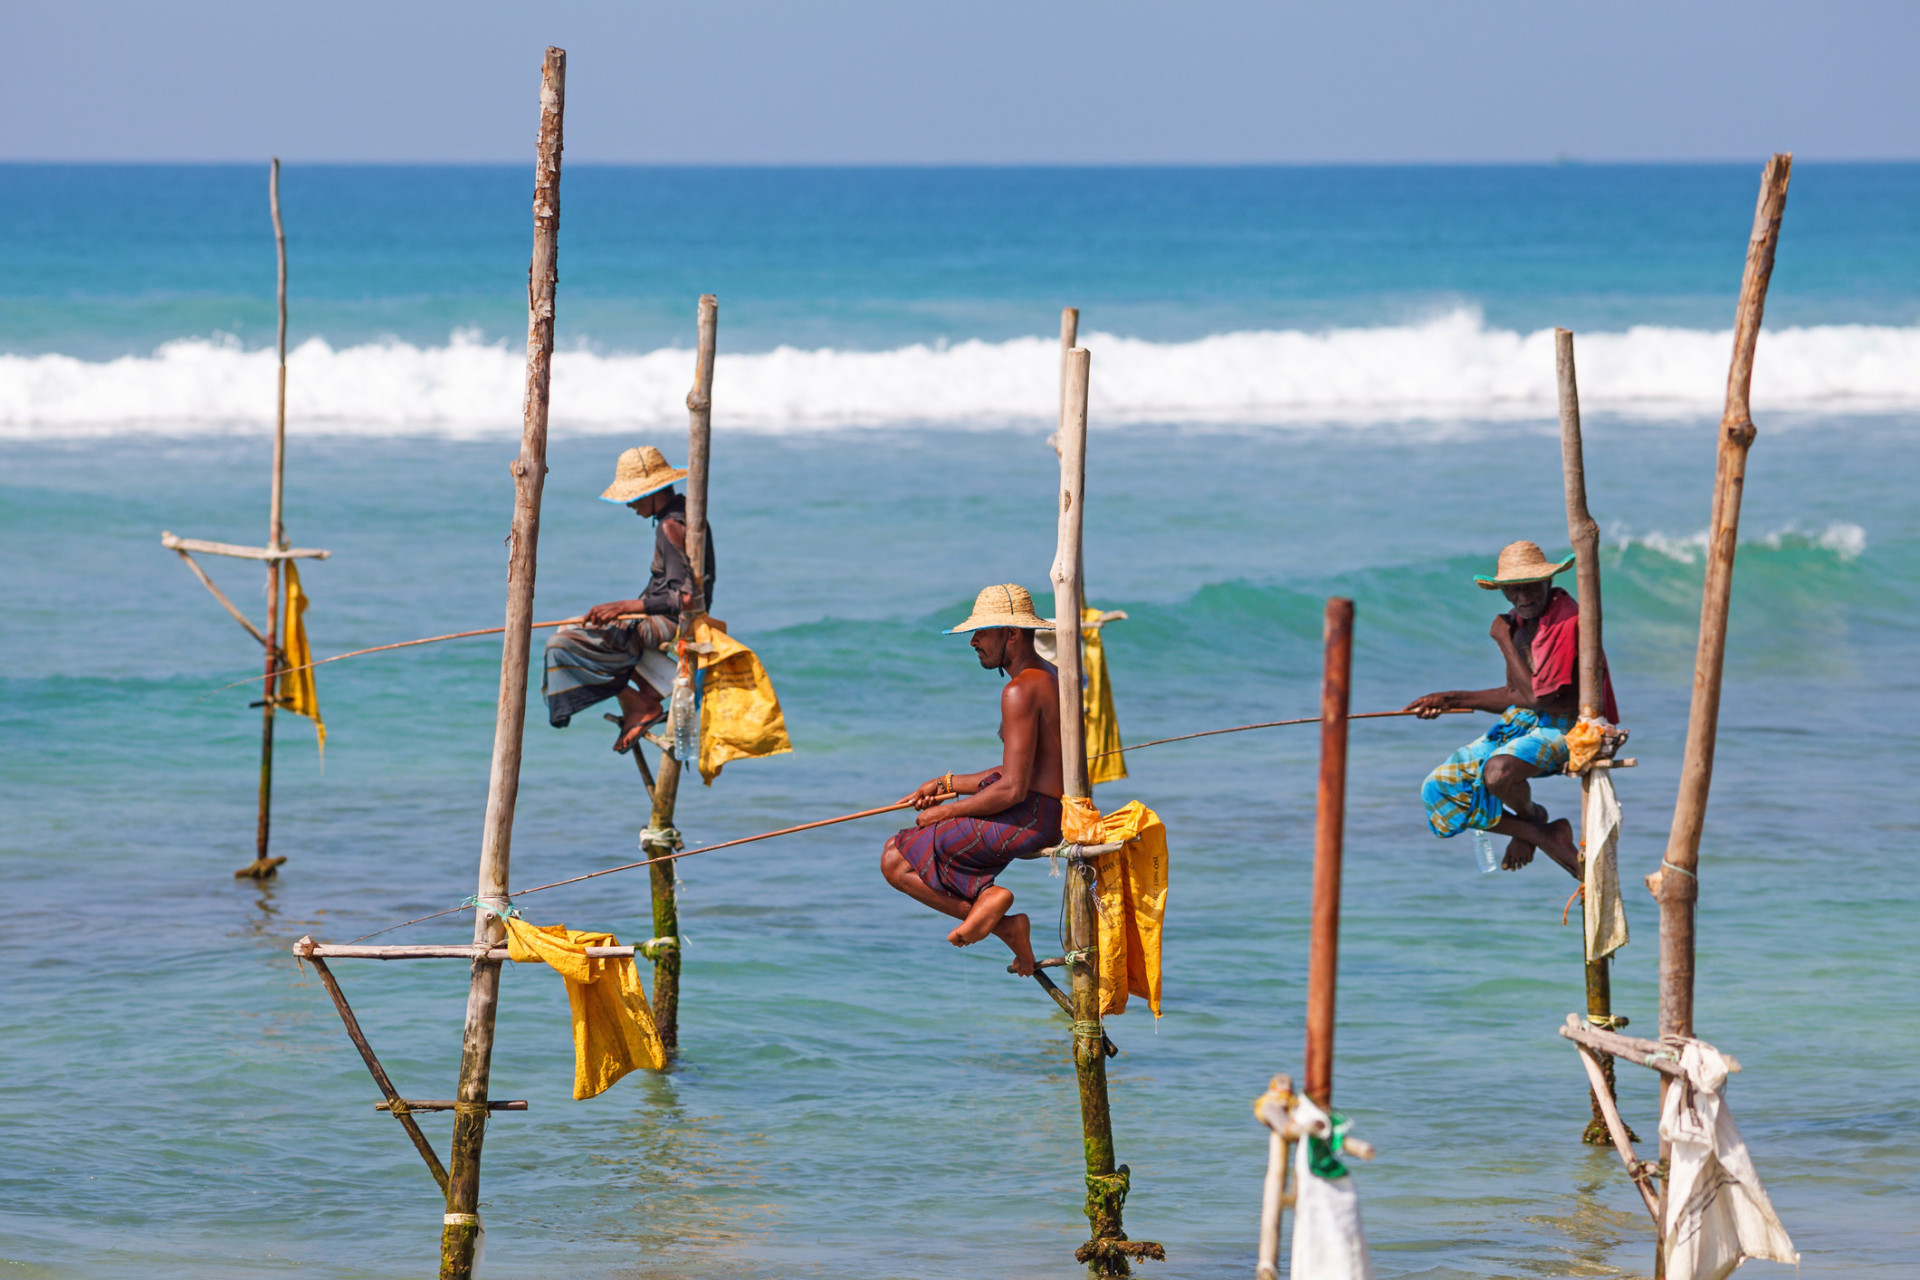 <p>Sadly, many of the stilt fishermen you see today are posing for the camera rather than trying to catch a living. For an authentic picture, head to little-known Polhenna Beach, near the town of Matara.</p> <p>See also: <a href="https://www.starsinsider.com/travel/439828/cities-with-impressive-beaches-on-their-doorstep">Cities with impressive beaches on their doorstep</a></p>